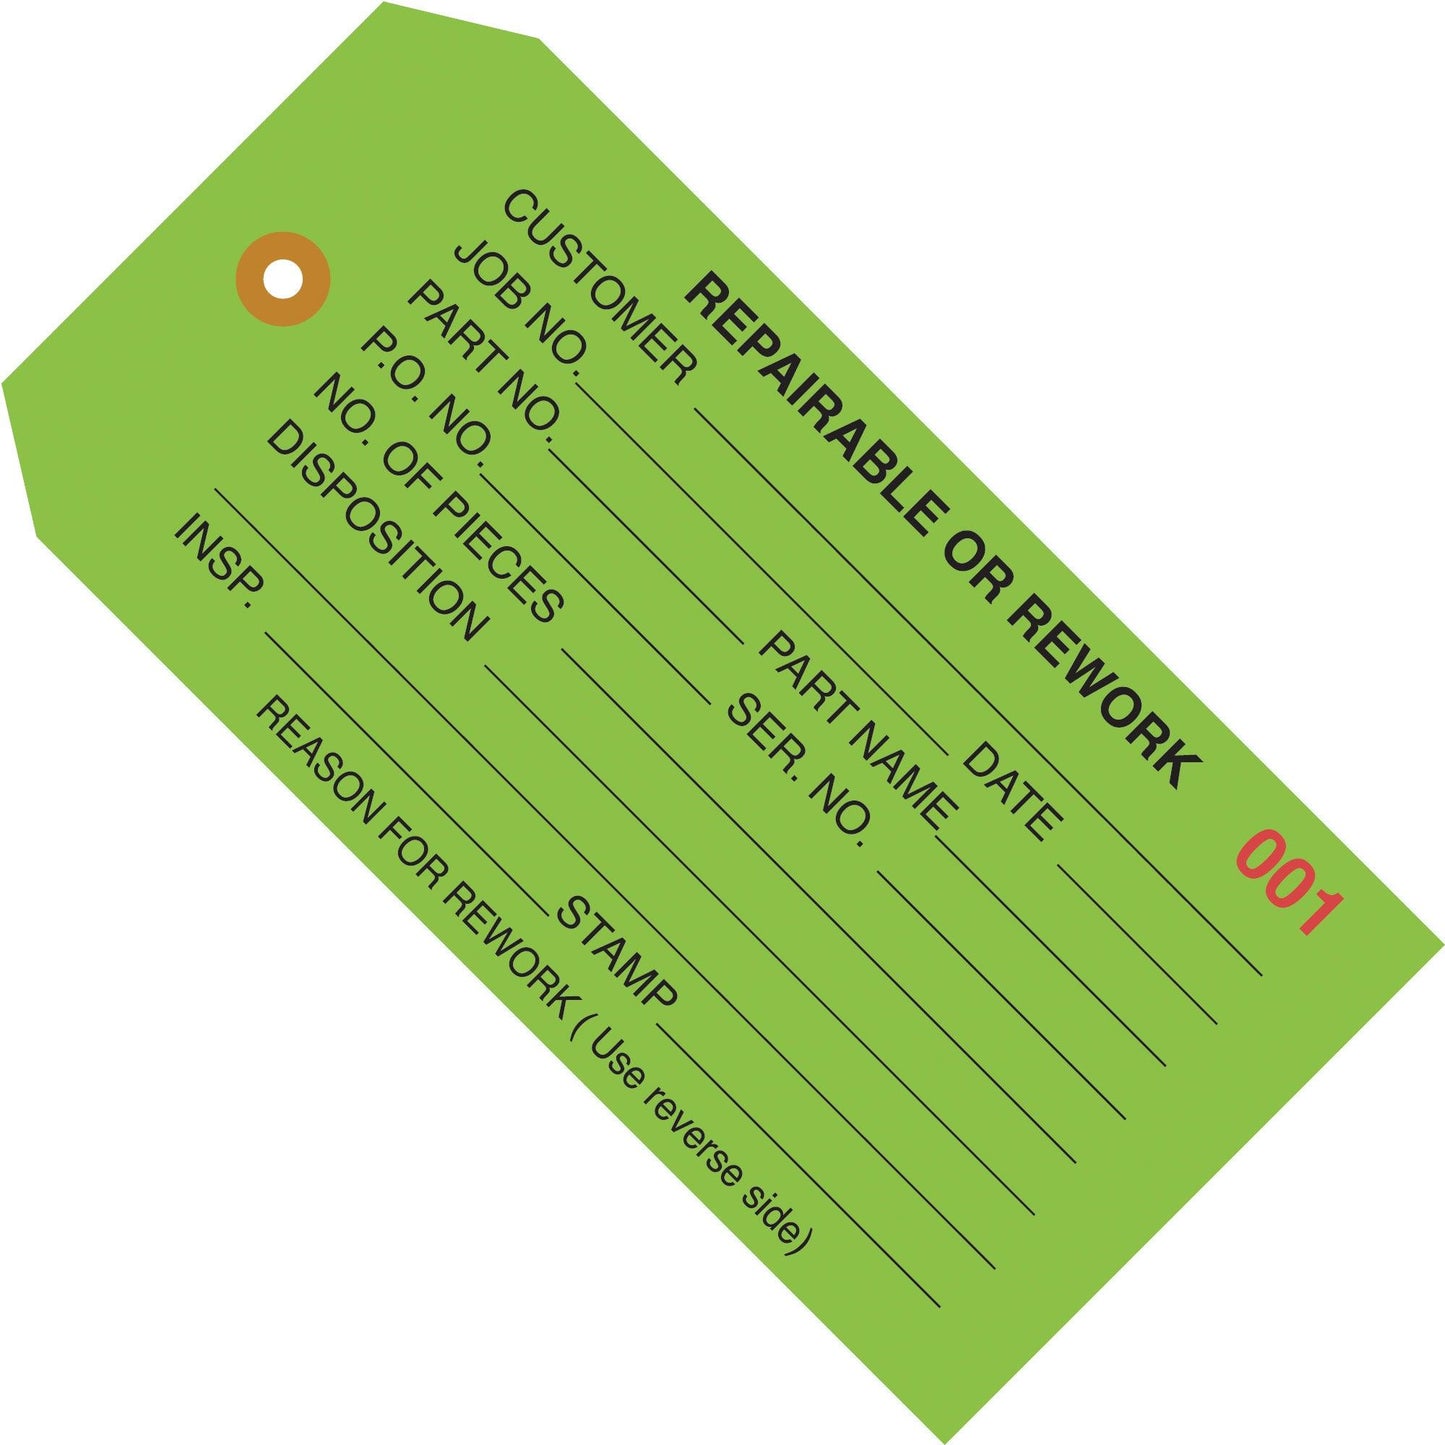 4 3/4 x 2 3/8" - "Repairable or Rework" Inspection Tags - G20041